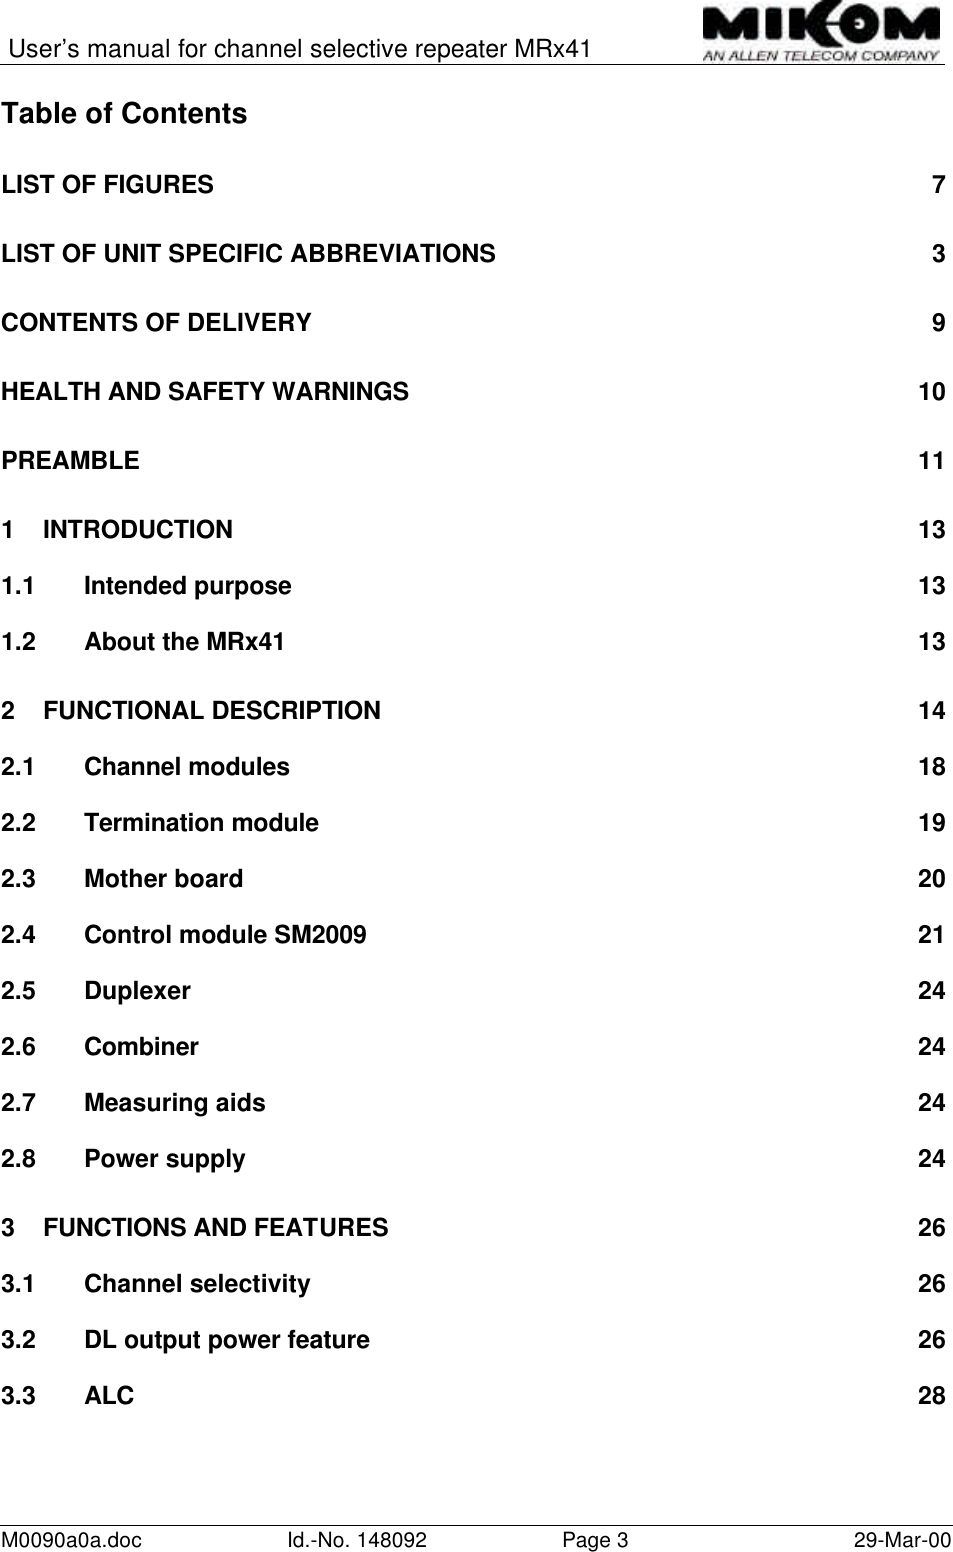 User’s manual for channel selective repeater MRx41M0090a0a.doc Id.-No. 148092 Page 329-Mar-00Table of ContentsLIST OF FIGURES 7LIST OF UNIT SPECIFIC ABBREVIATIONS 3CONTENTS OF DELIVERY 9HEALTH AND SAFETY WARNINGS 10PREAMBLE 111INTRODUCTION 131.1 Intended purpose 131.2 About the MRx41 132FUNCTIONAL DESCRIPTION 142.1 Channel modules 182.2 Termination module 192.3 Mother board 202.4 Control module SM2009 212.5 Duplexer 242.6 Combiner 242.7 Measuring aids 242.8 Power supply 243FUNCTIONS AND FEATURES 263.1 Channel selectivity 263.2 DL output power feature 263.3 ALC 28